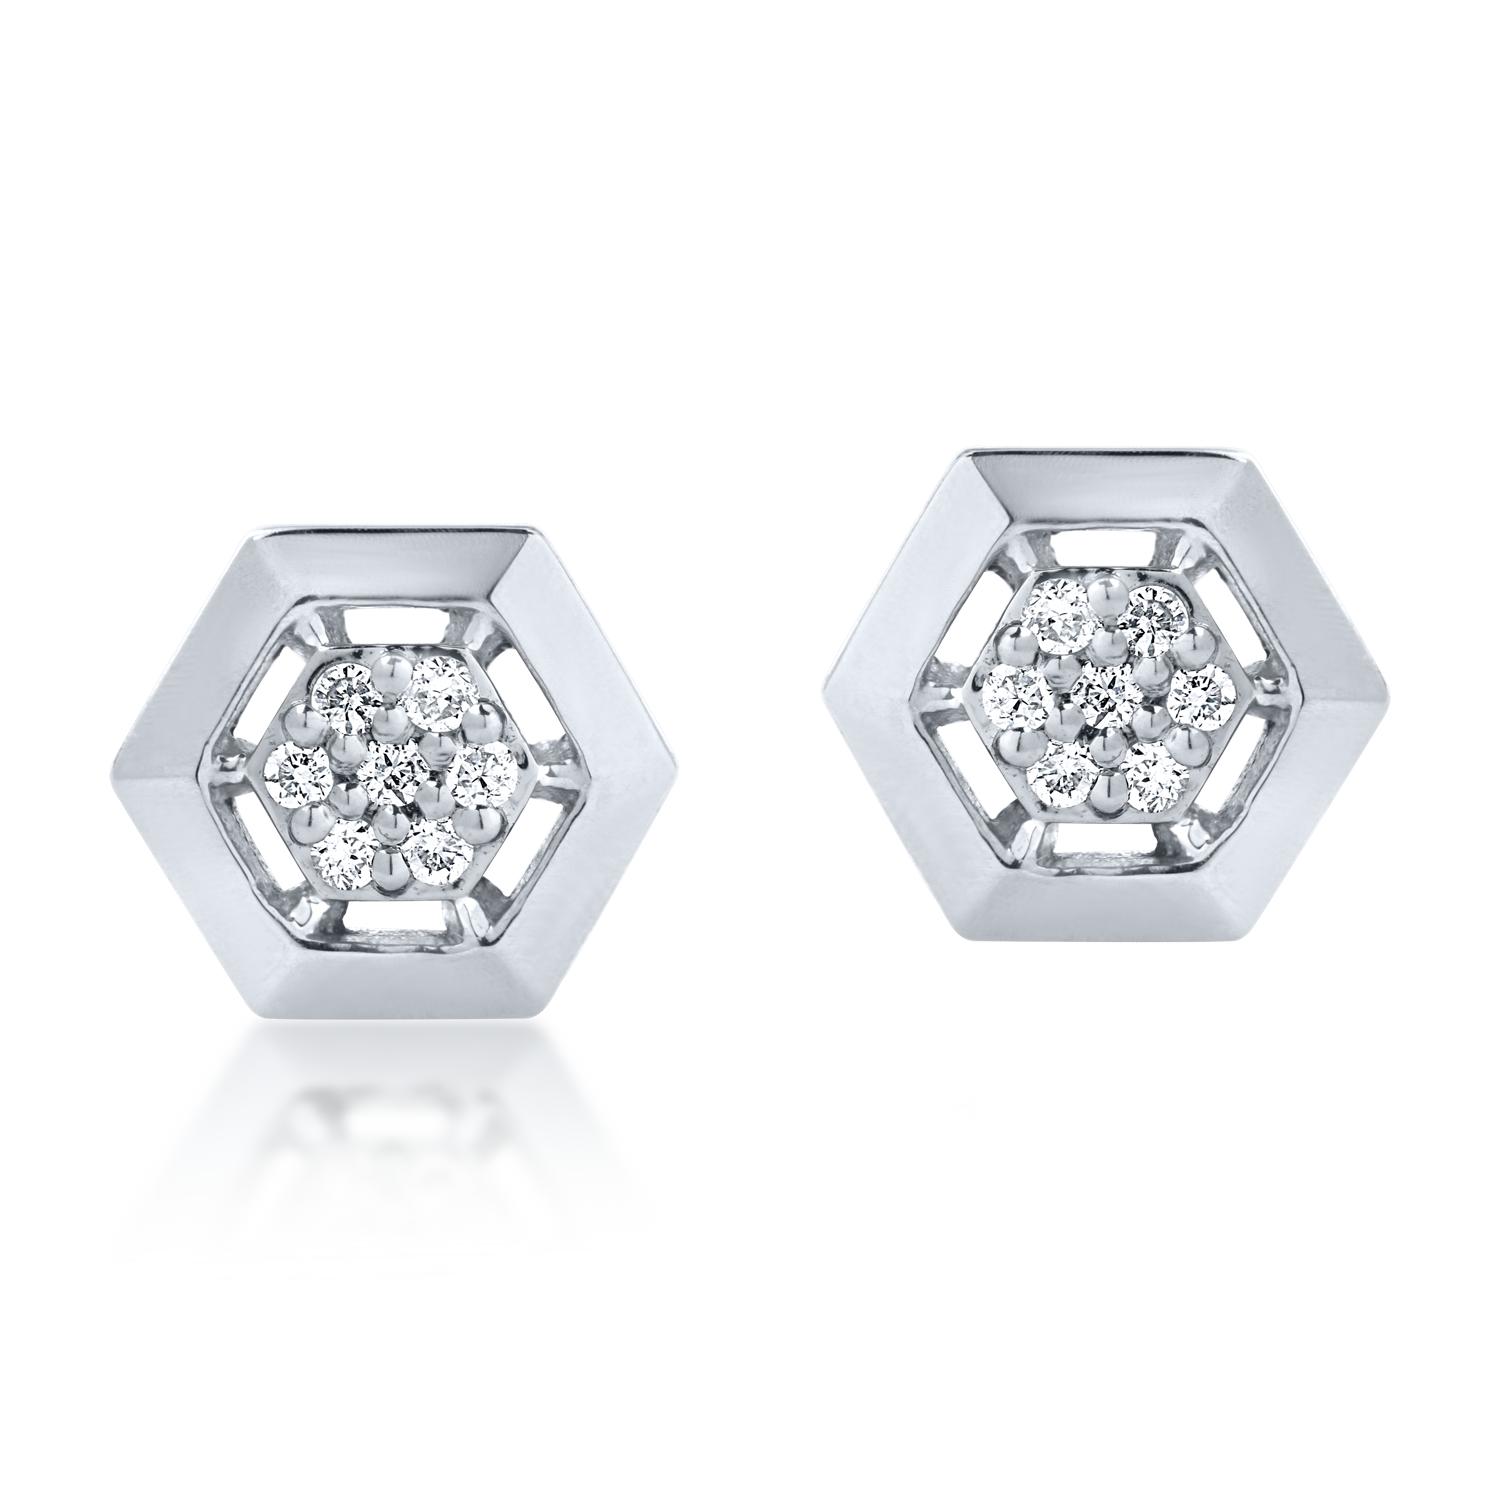 White gold earrings with 0.04ct diamonds